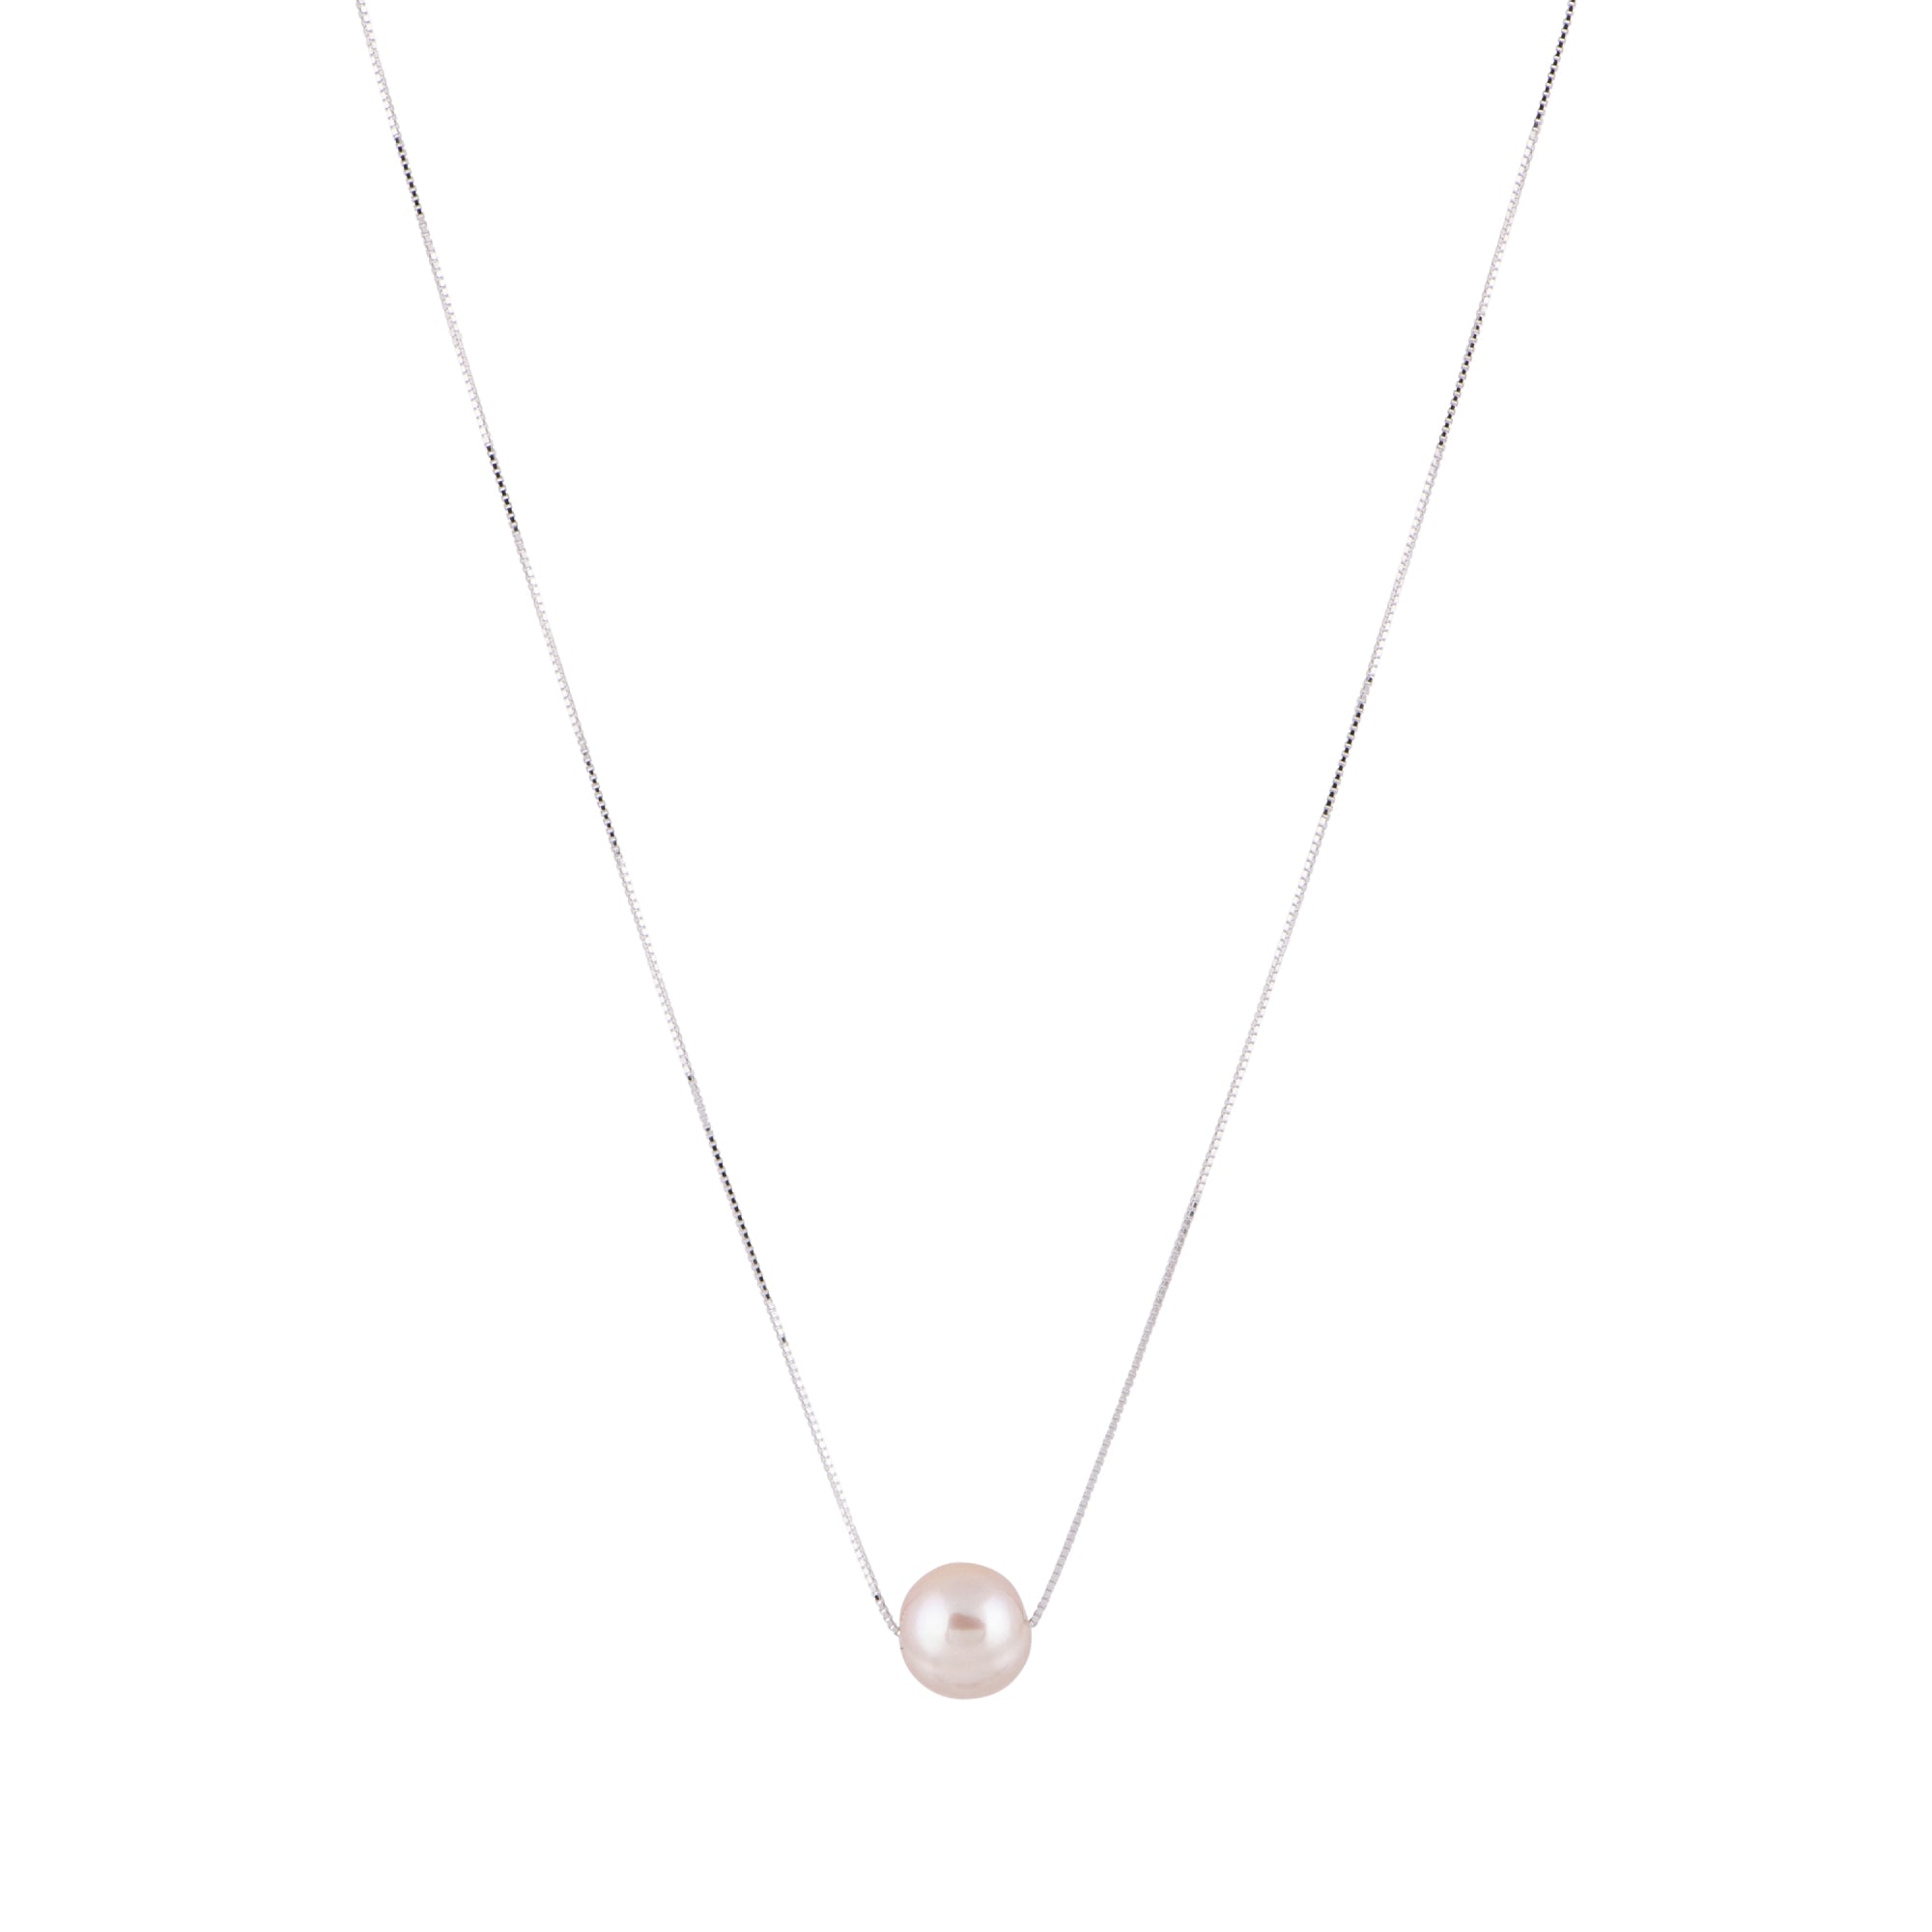 18 inch 11-12 mm Fresh Water Pearl Necklace with Sterling Silver Clasp |  Christopher's Fine Jewelry